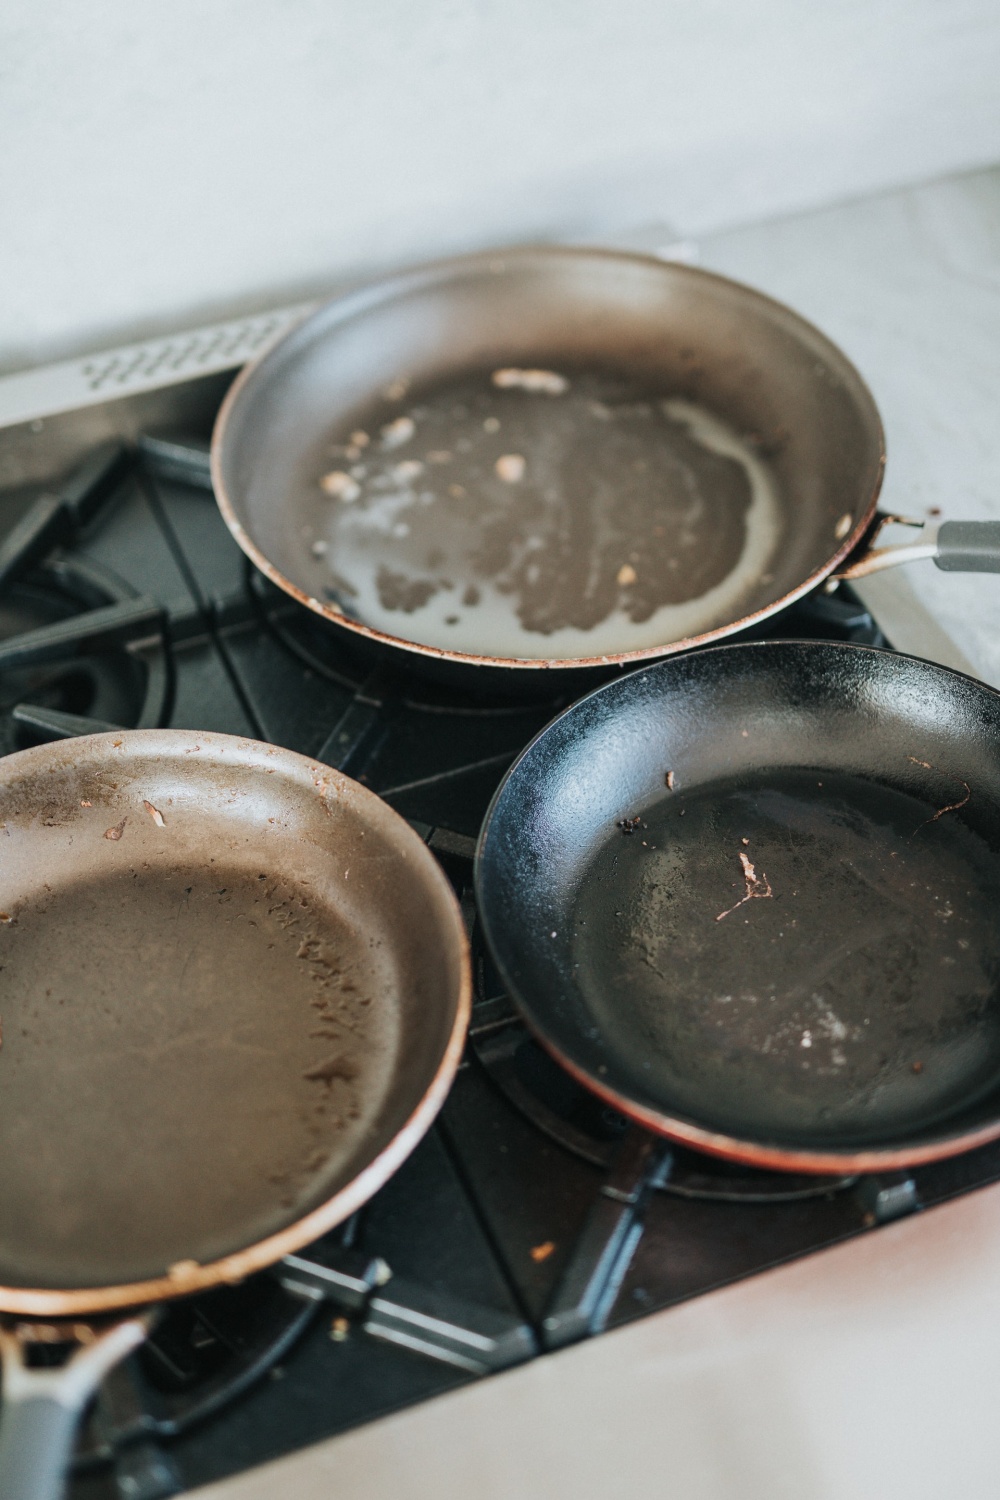 A horrifying amount of microplastic discharges from nonstick pans